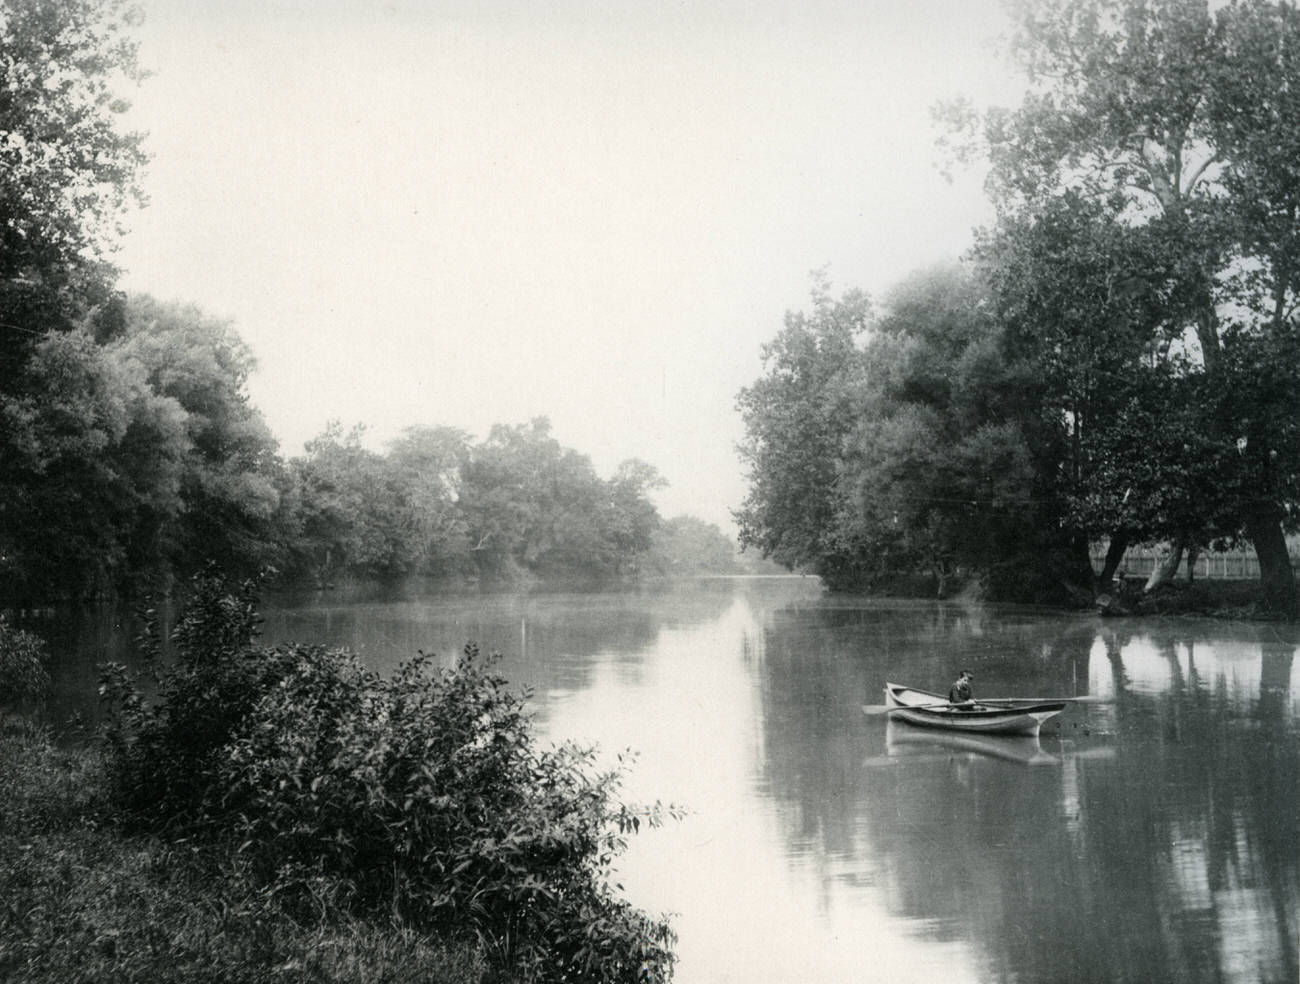 Boater on the Olentangy River, momentary pause for a photograph, 1890s